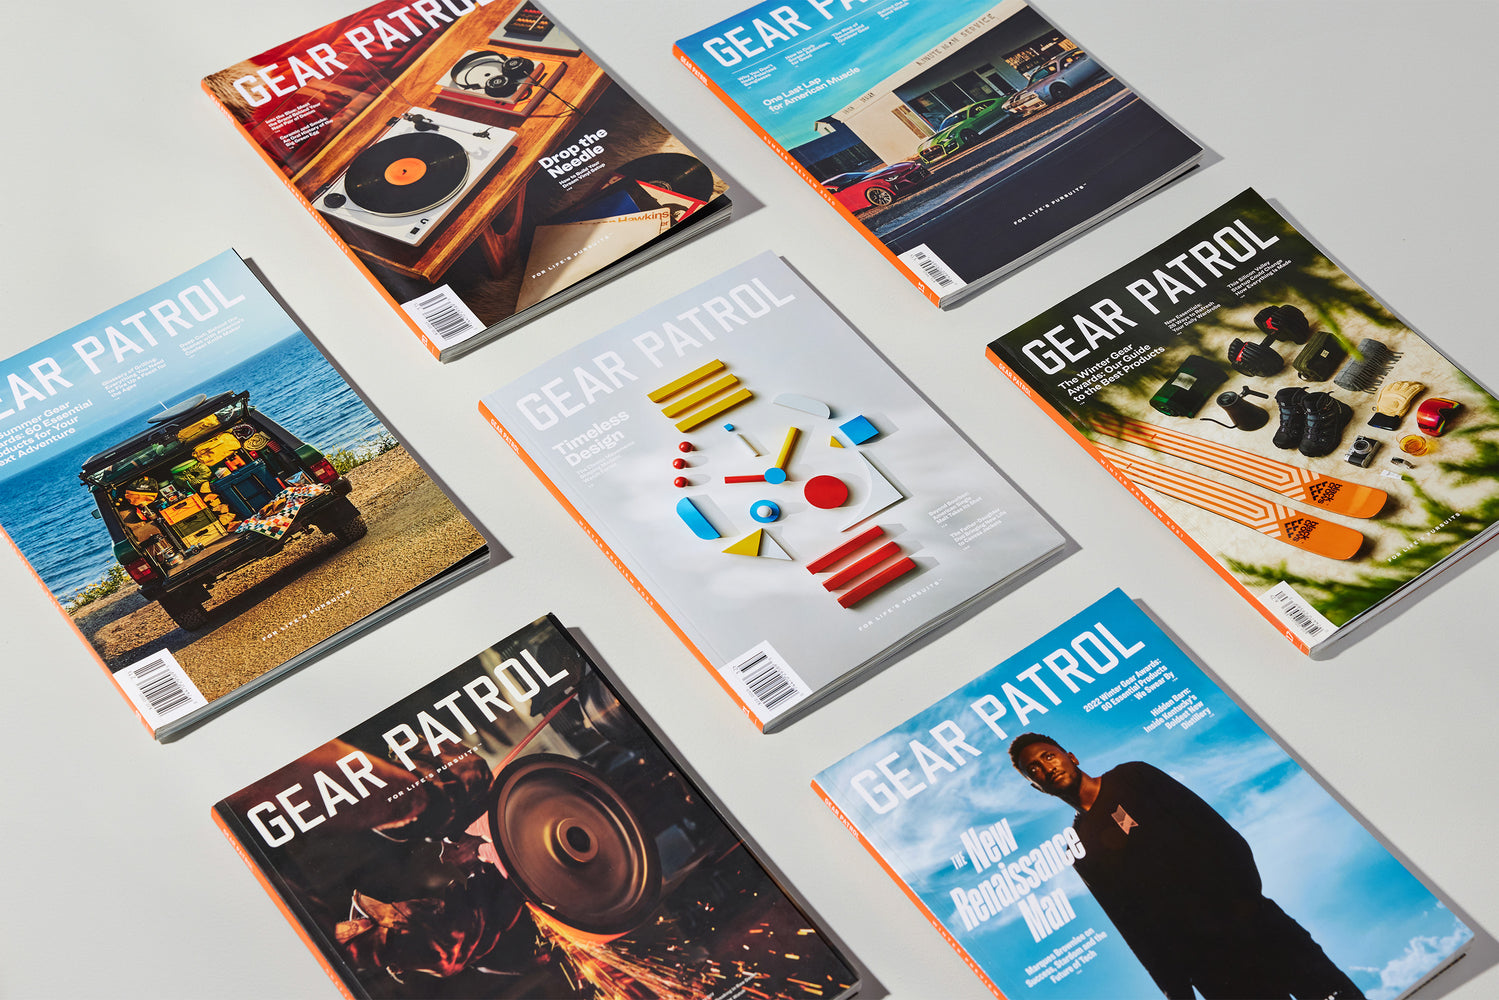 assortment of copies of gear patrol magazine laying on a gray table